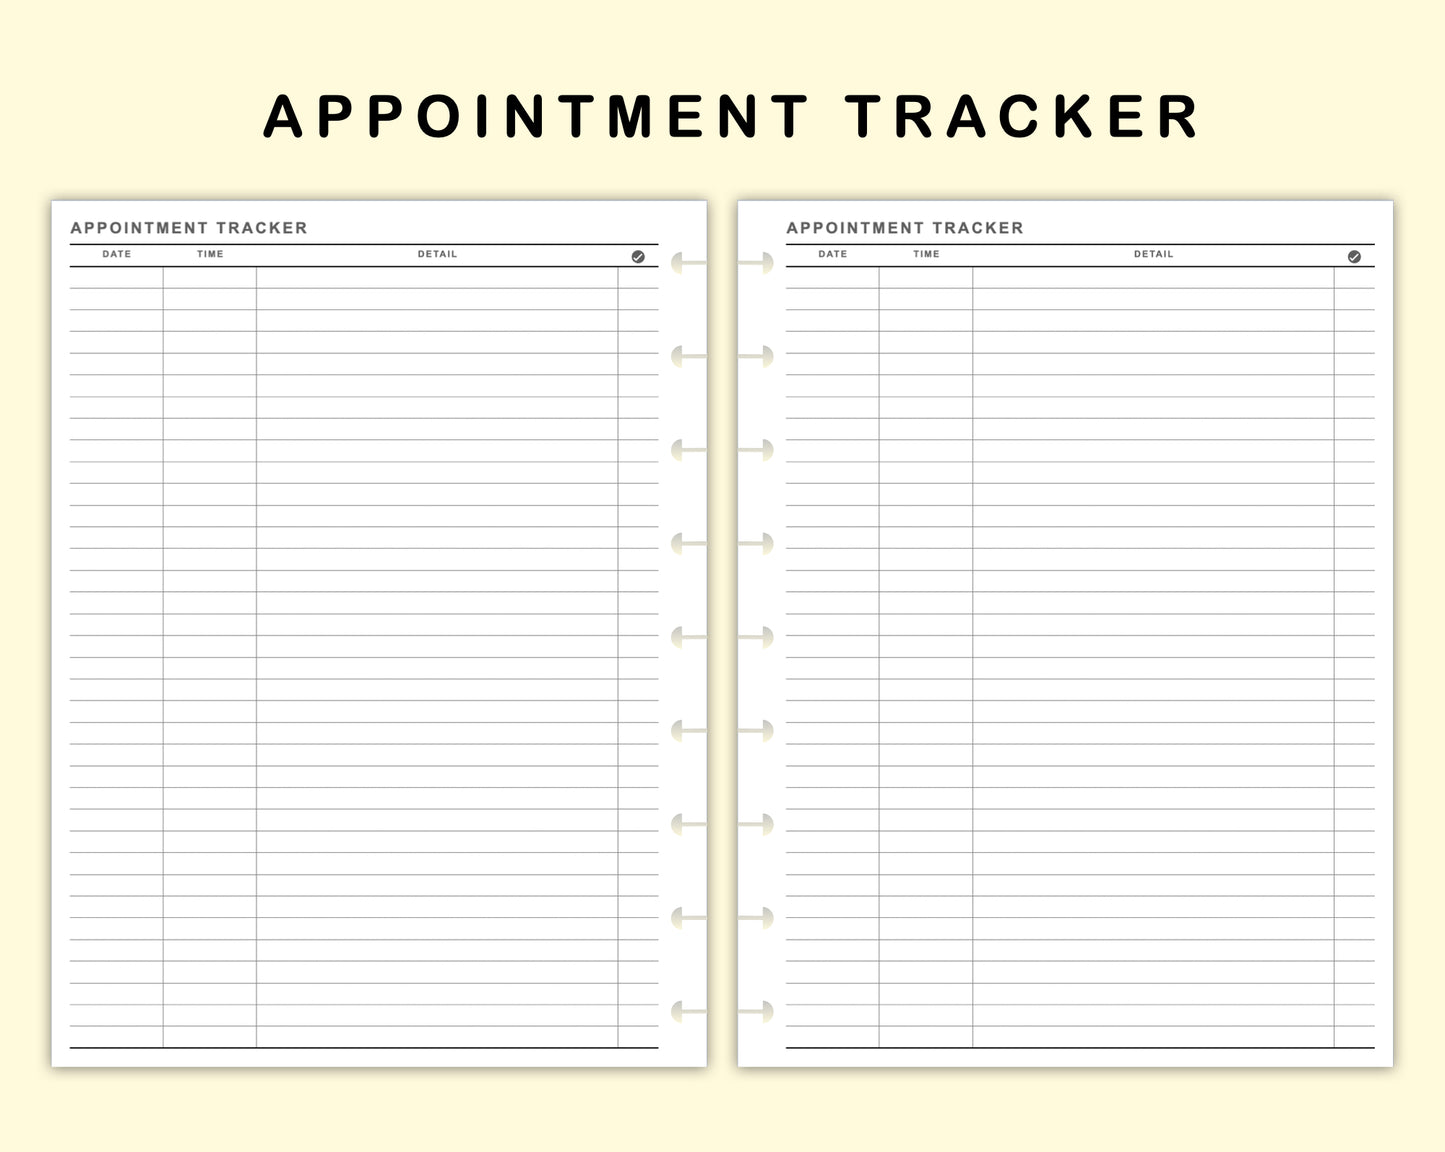 Classic HP Inserts - Appointment Tracker